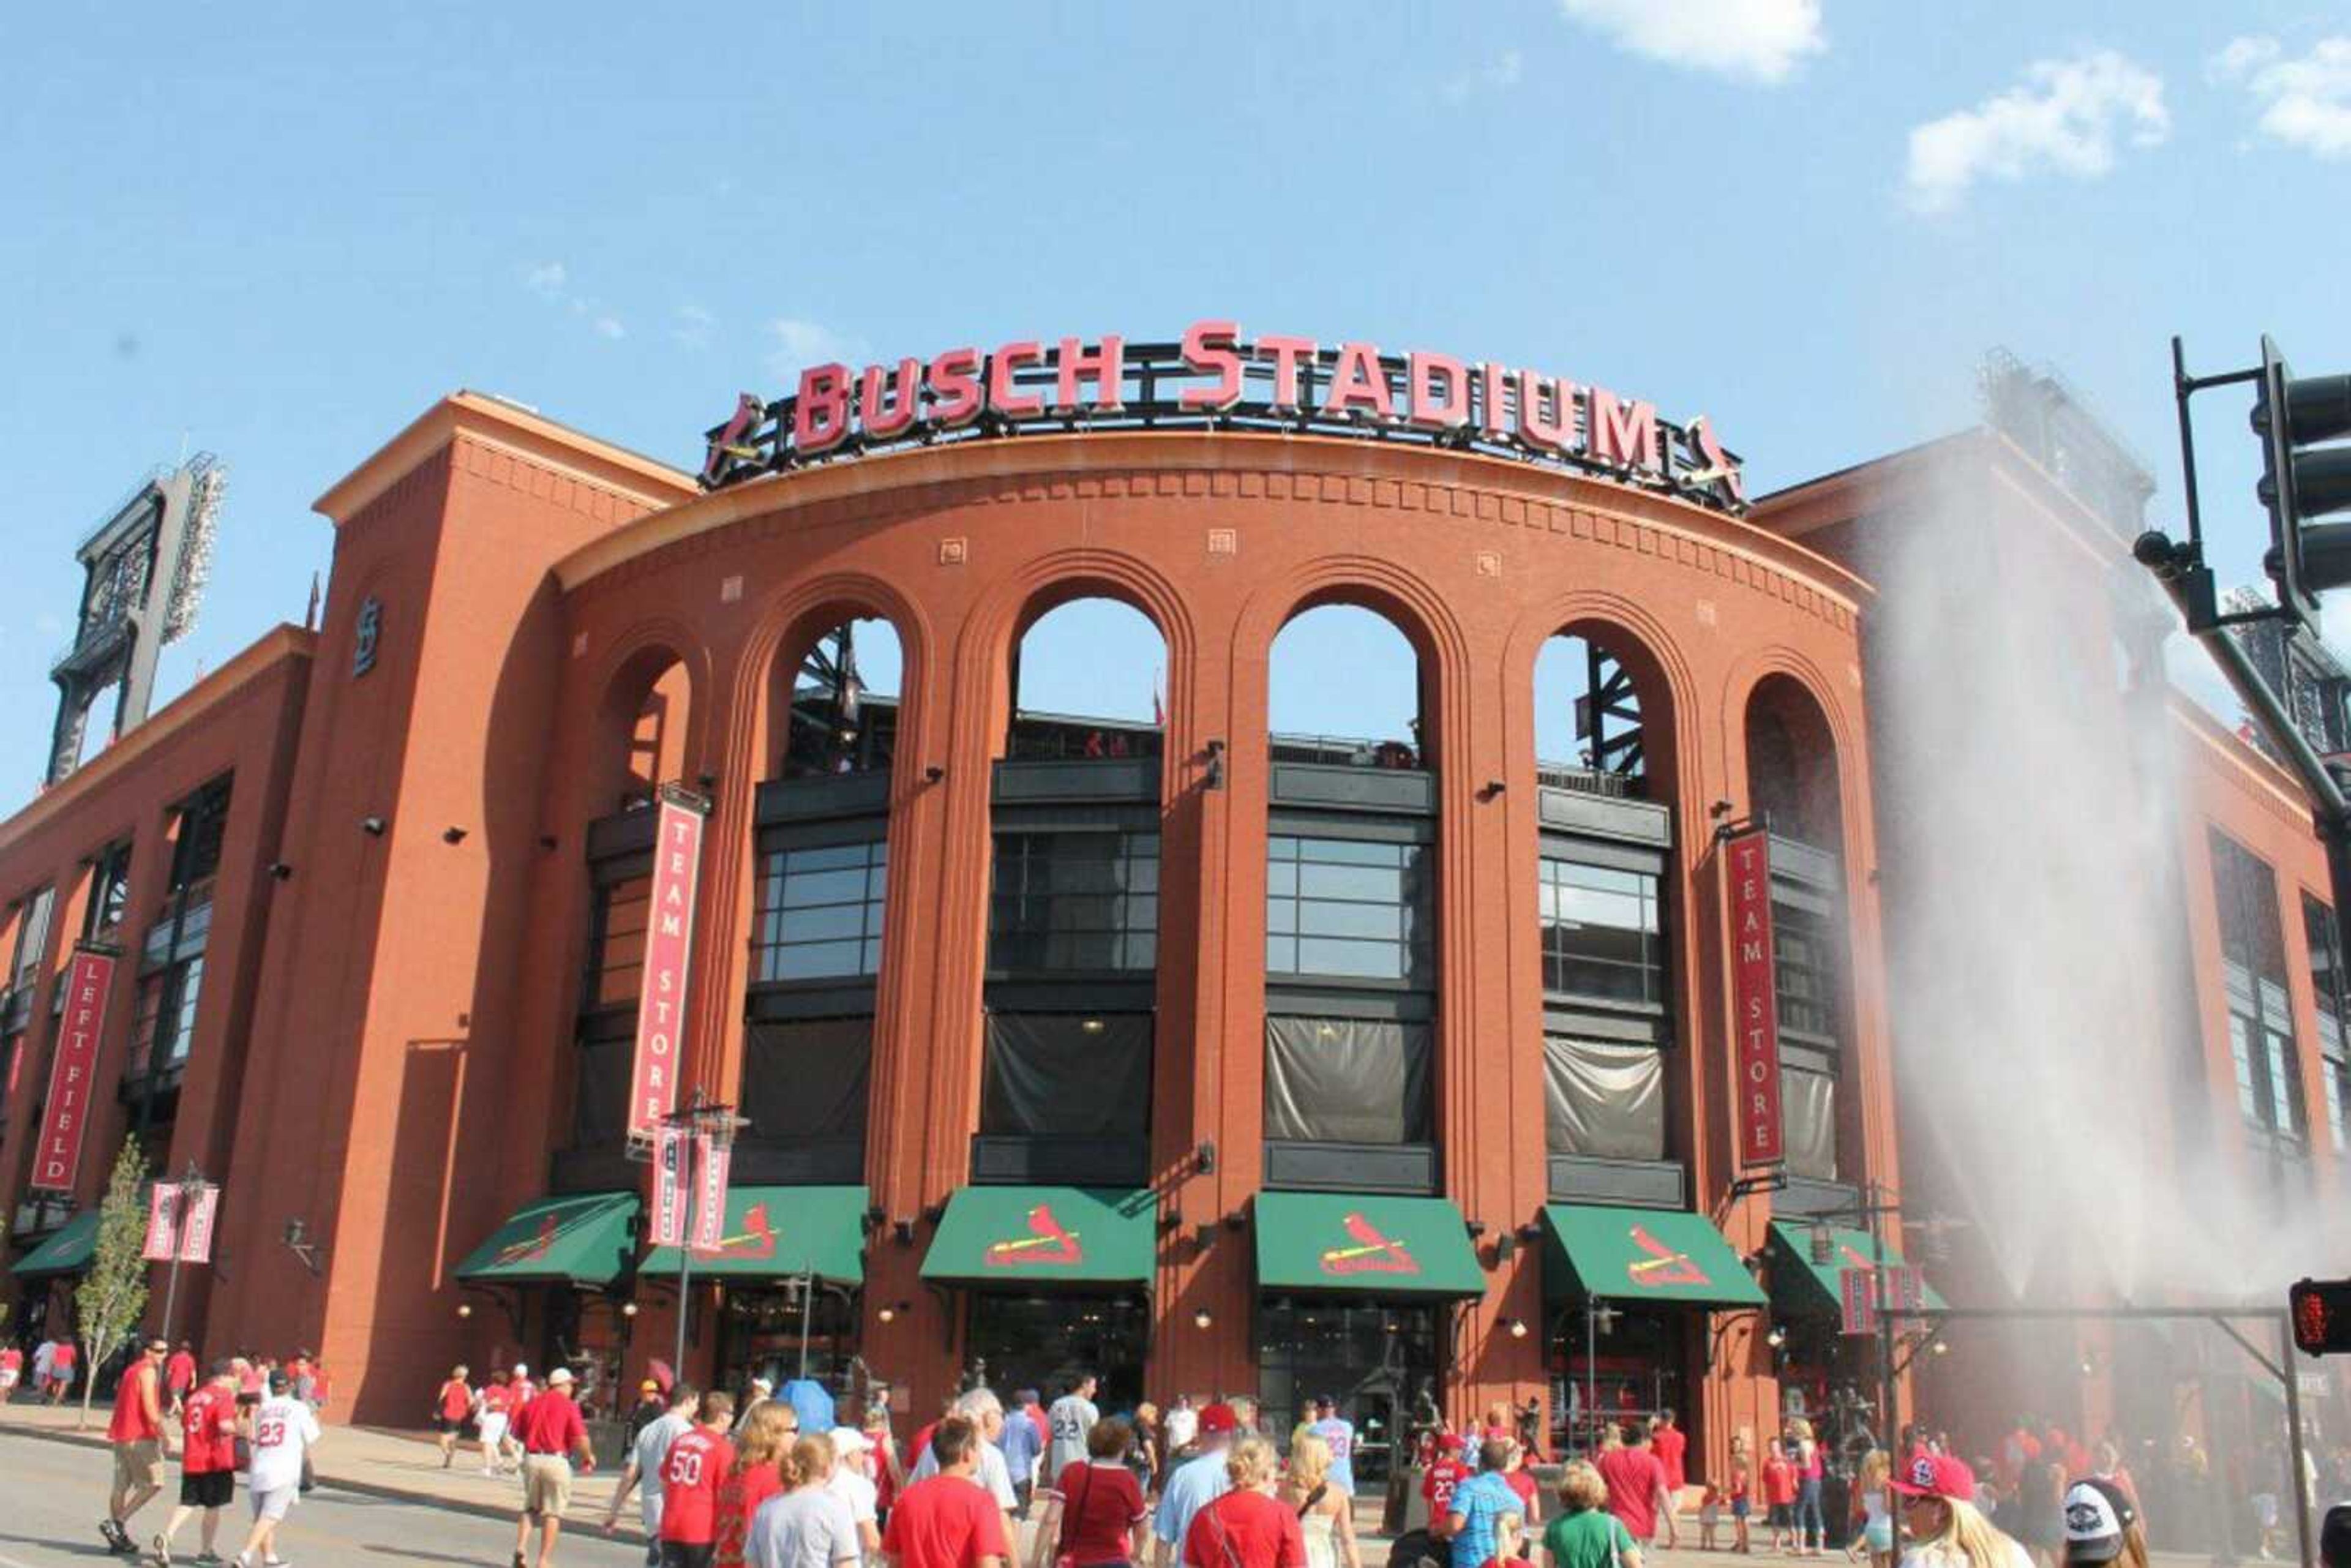 Gateway will be stopping by Busch Stadium on Oct. 1 for the Cardinals vs. Pirates game.